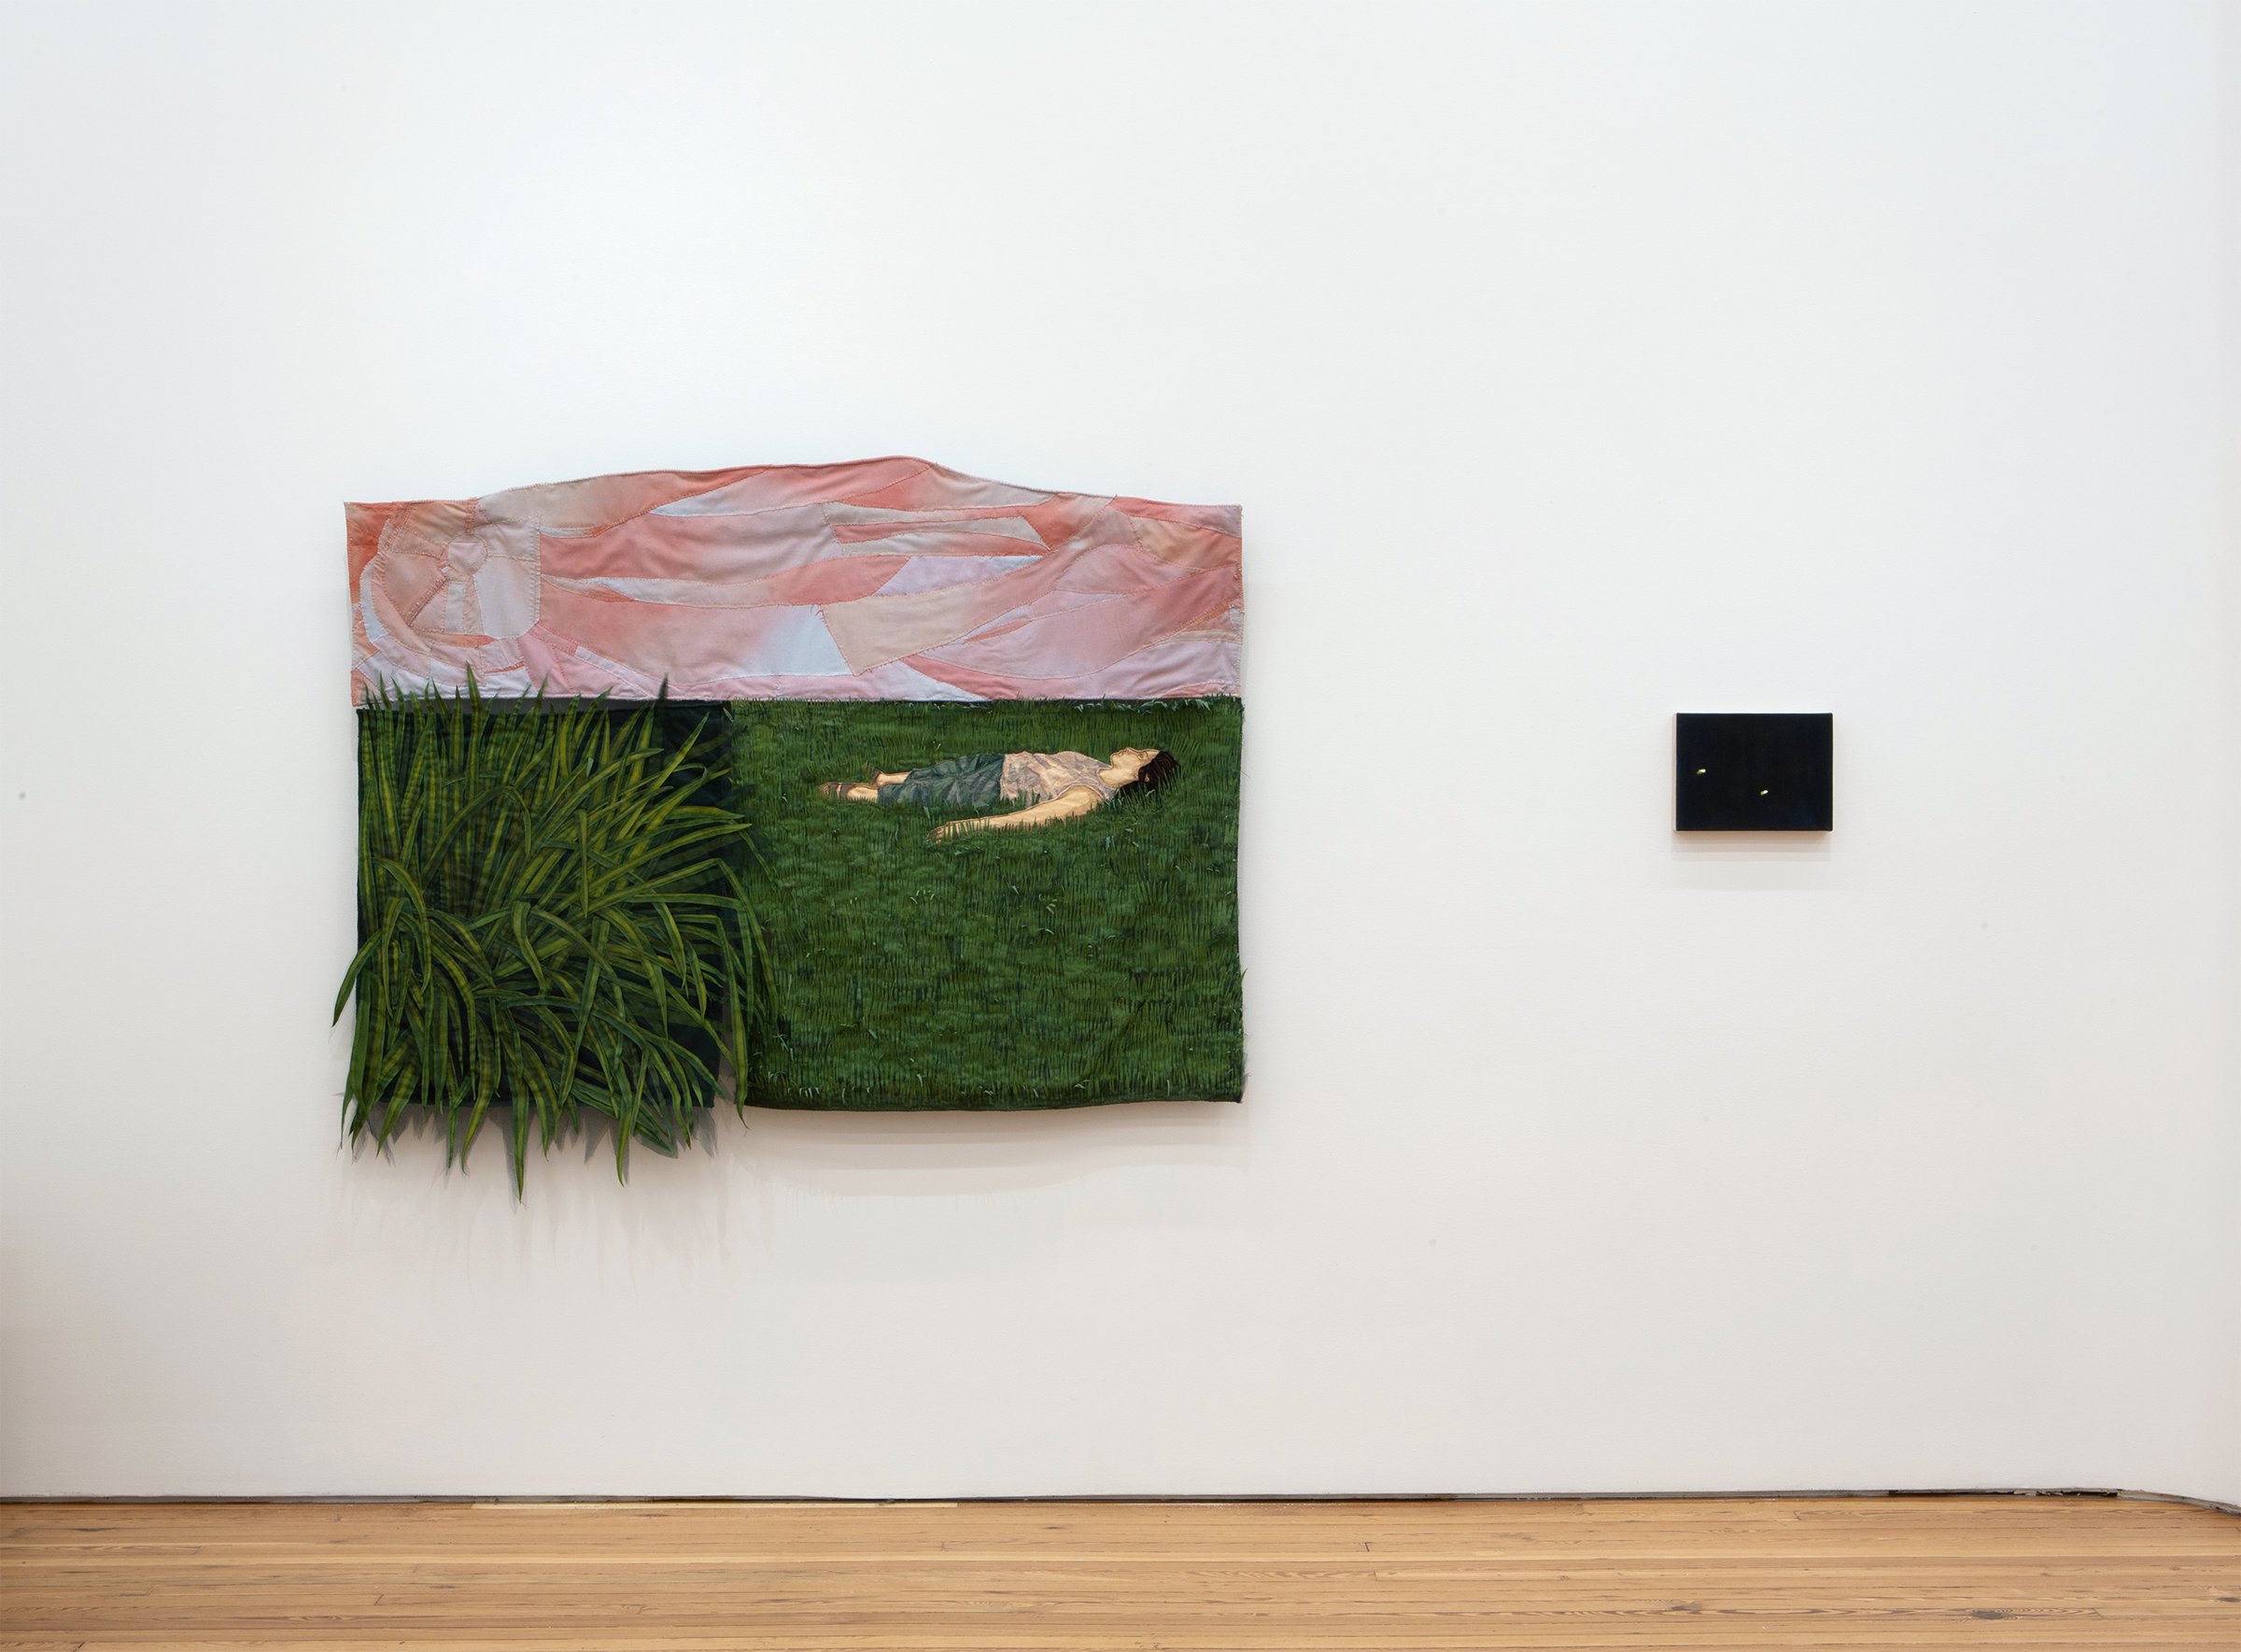   Installation Image: 2024, The Garden of Forking Paths, Deli Gallery and Calderón, New York, NY    Credit: Deli Gallery 